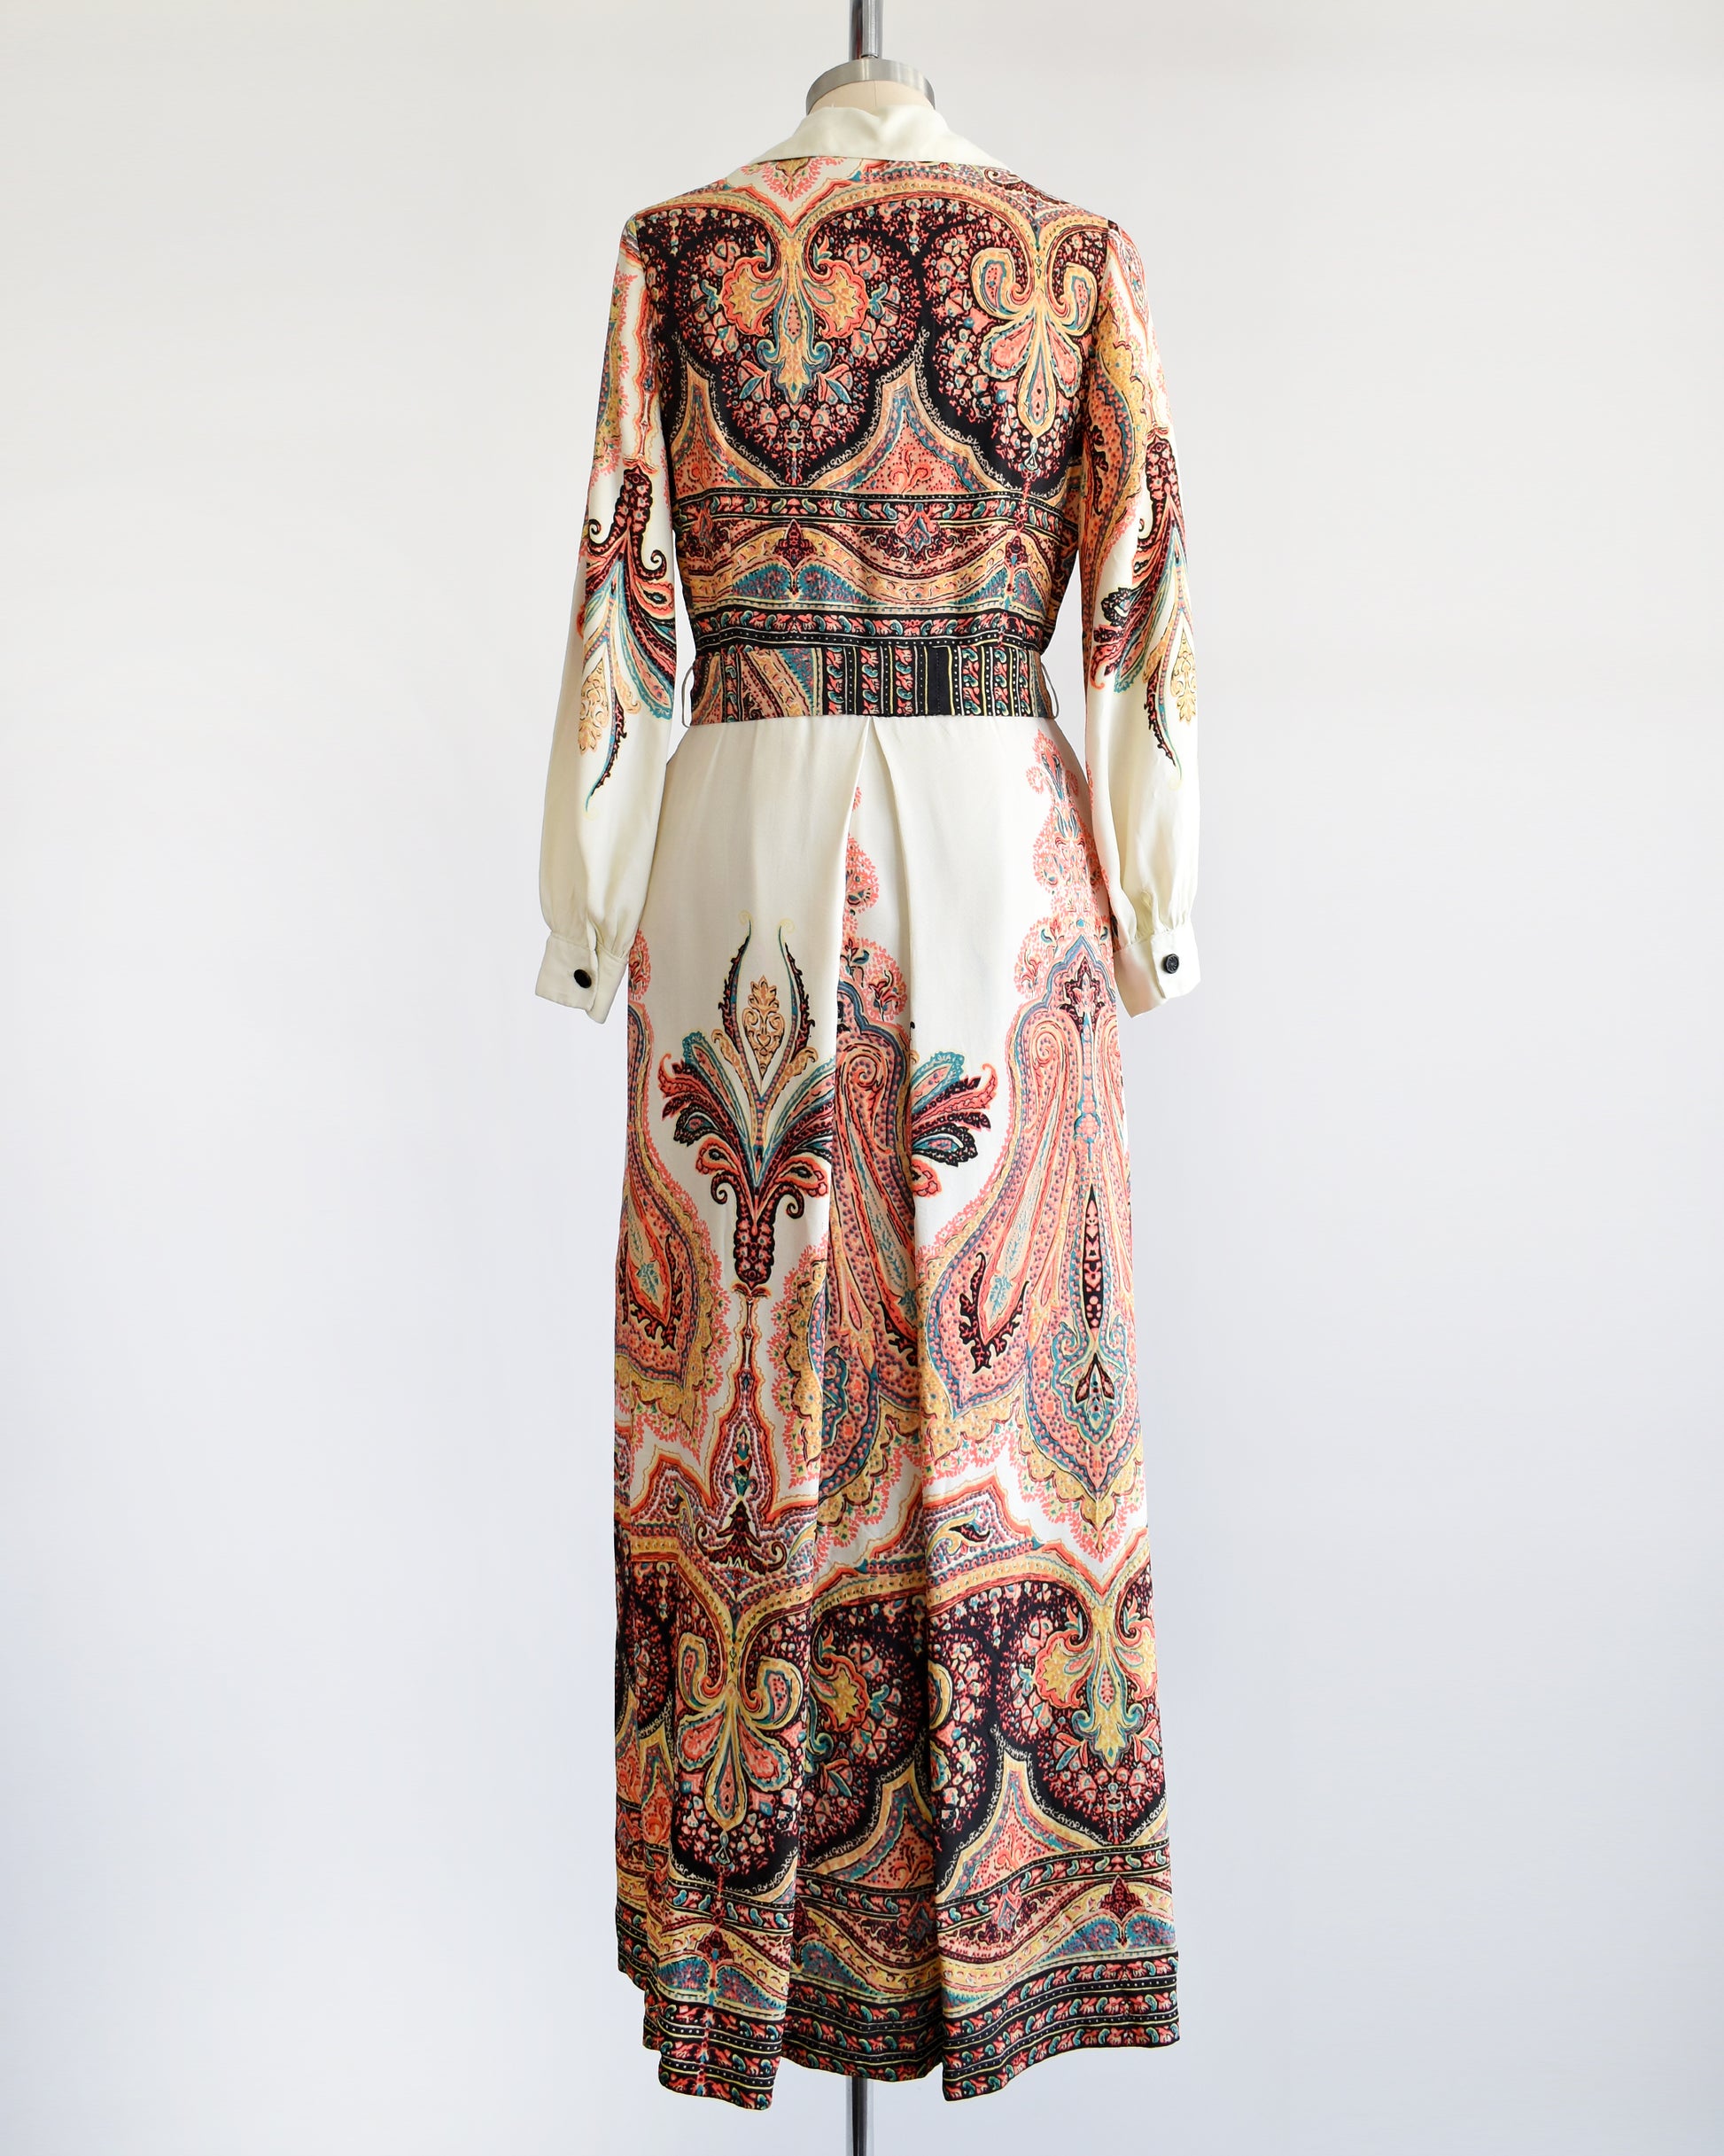 Back view of a vintage 1970s psychedelic paisley maxi dress 